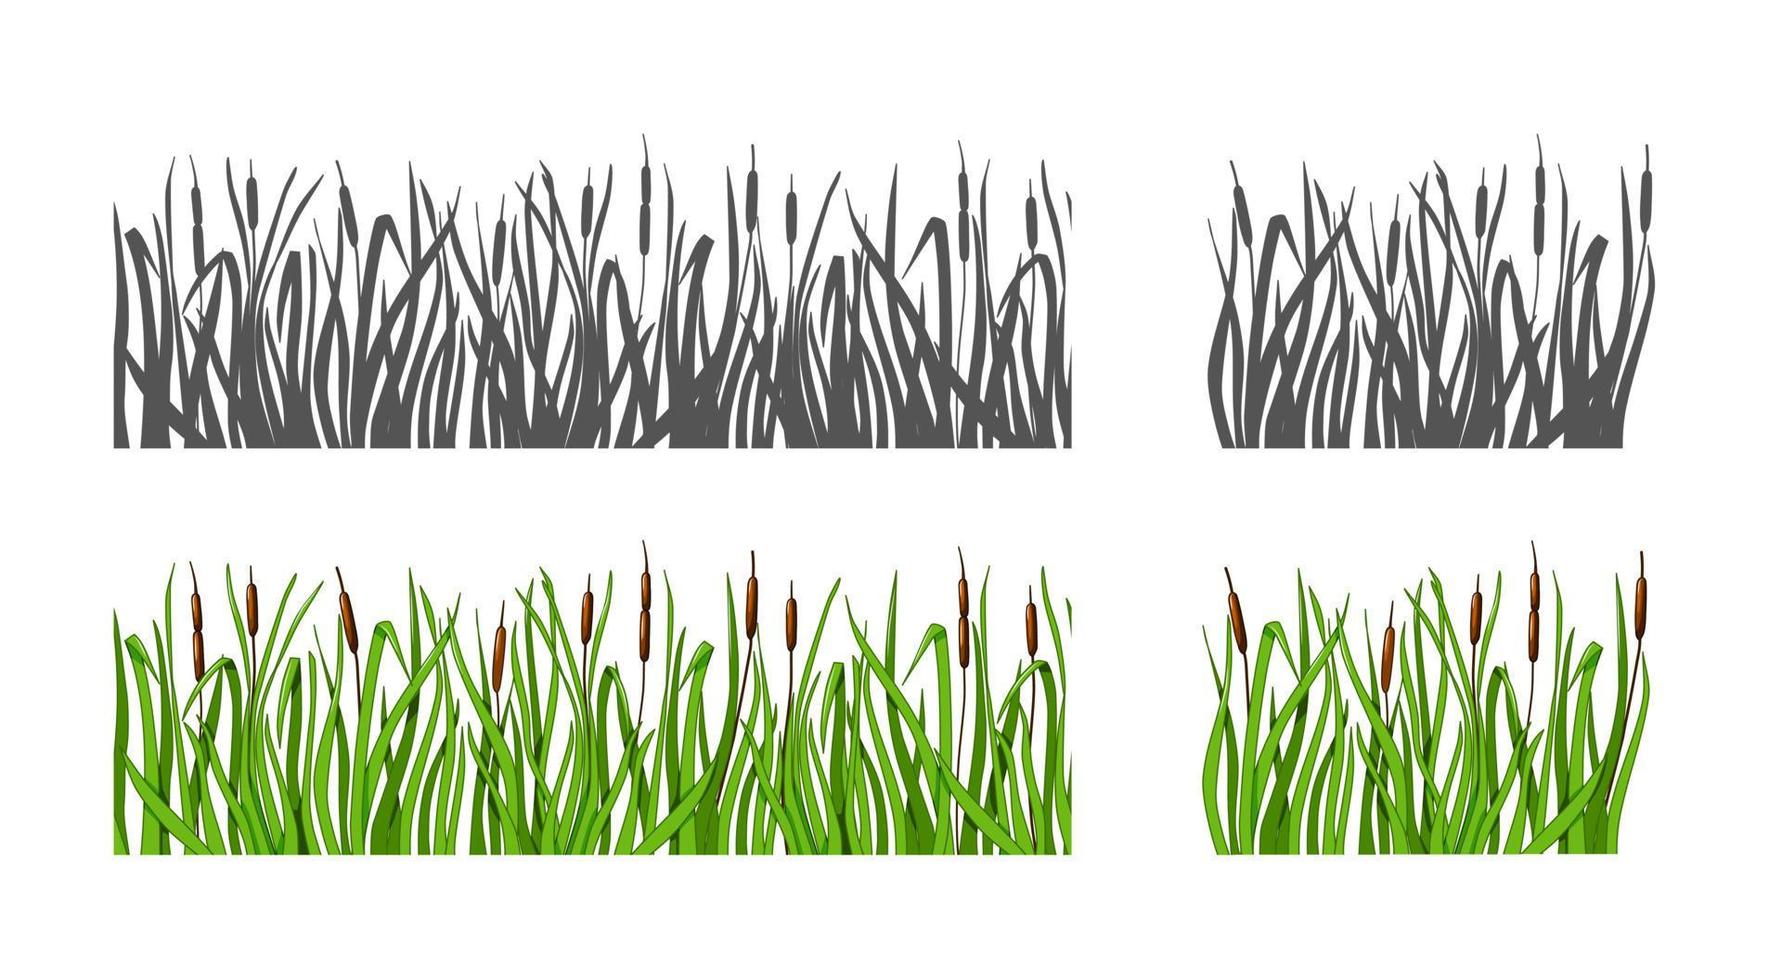 Grass with reeds set silhouette and color option. Isolated background. Vector illustration.